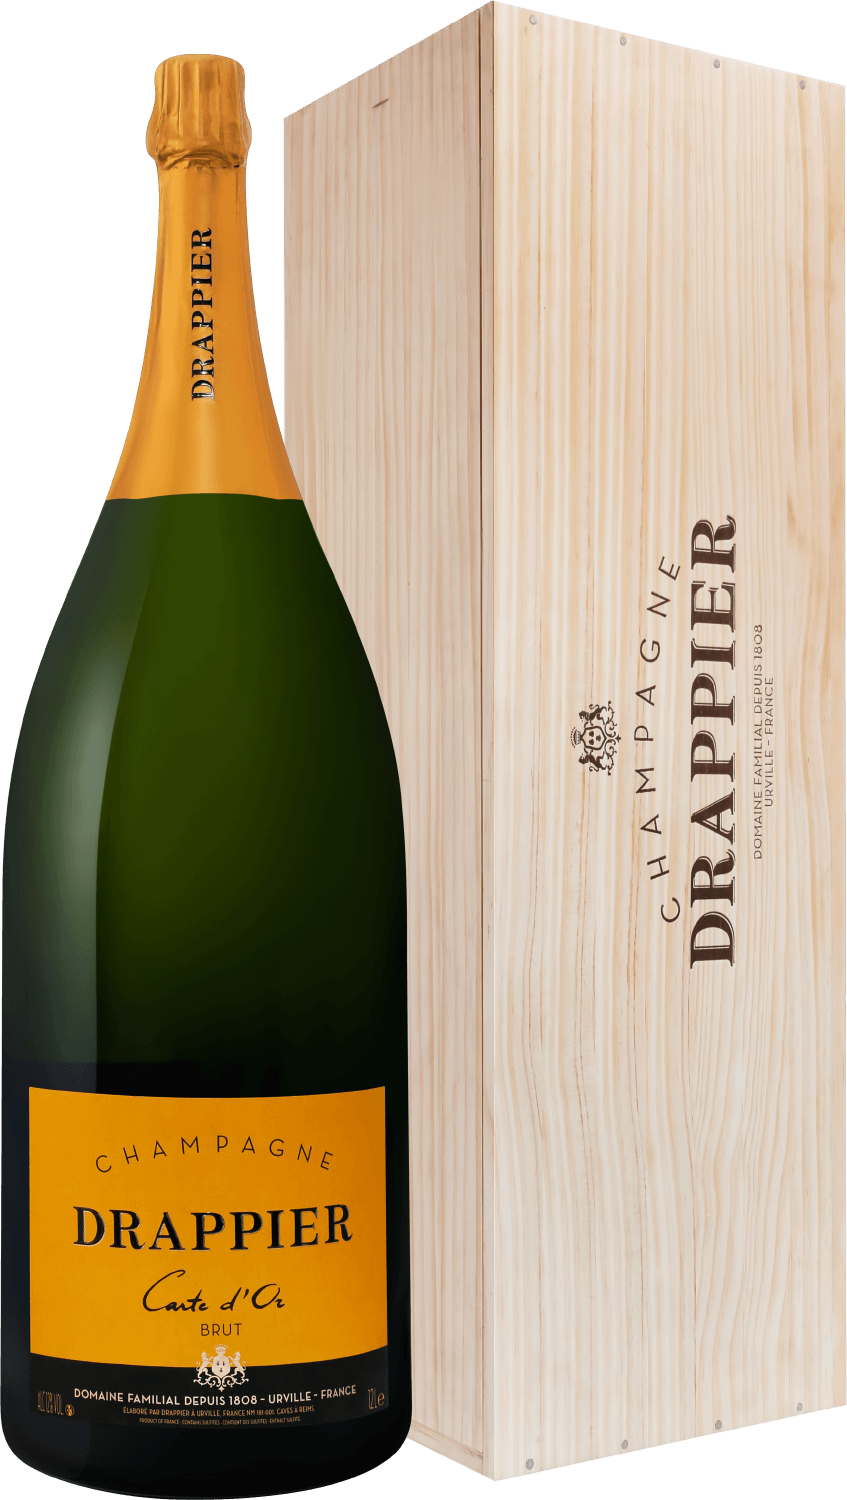 Drappier Carte d'Or (gift box) drappier carte d’or brut champagne aop in gift box with two glasses